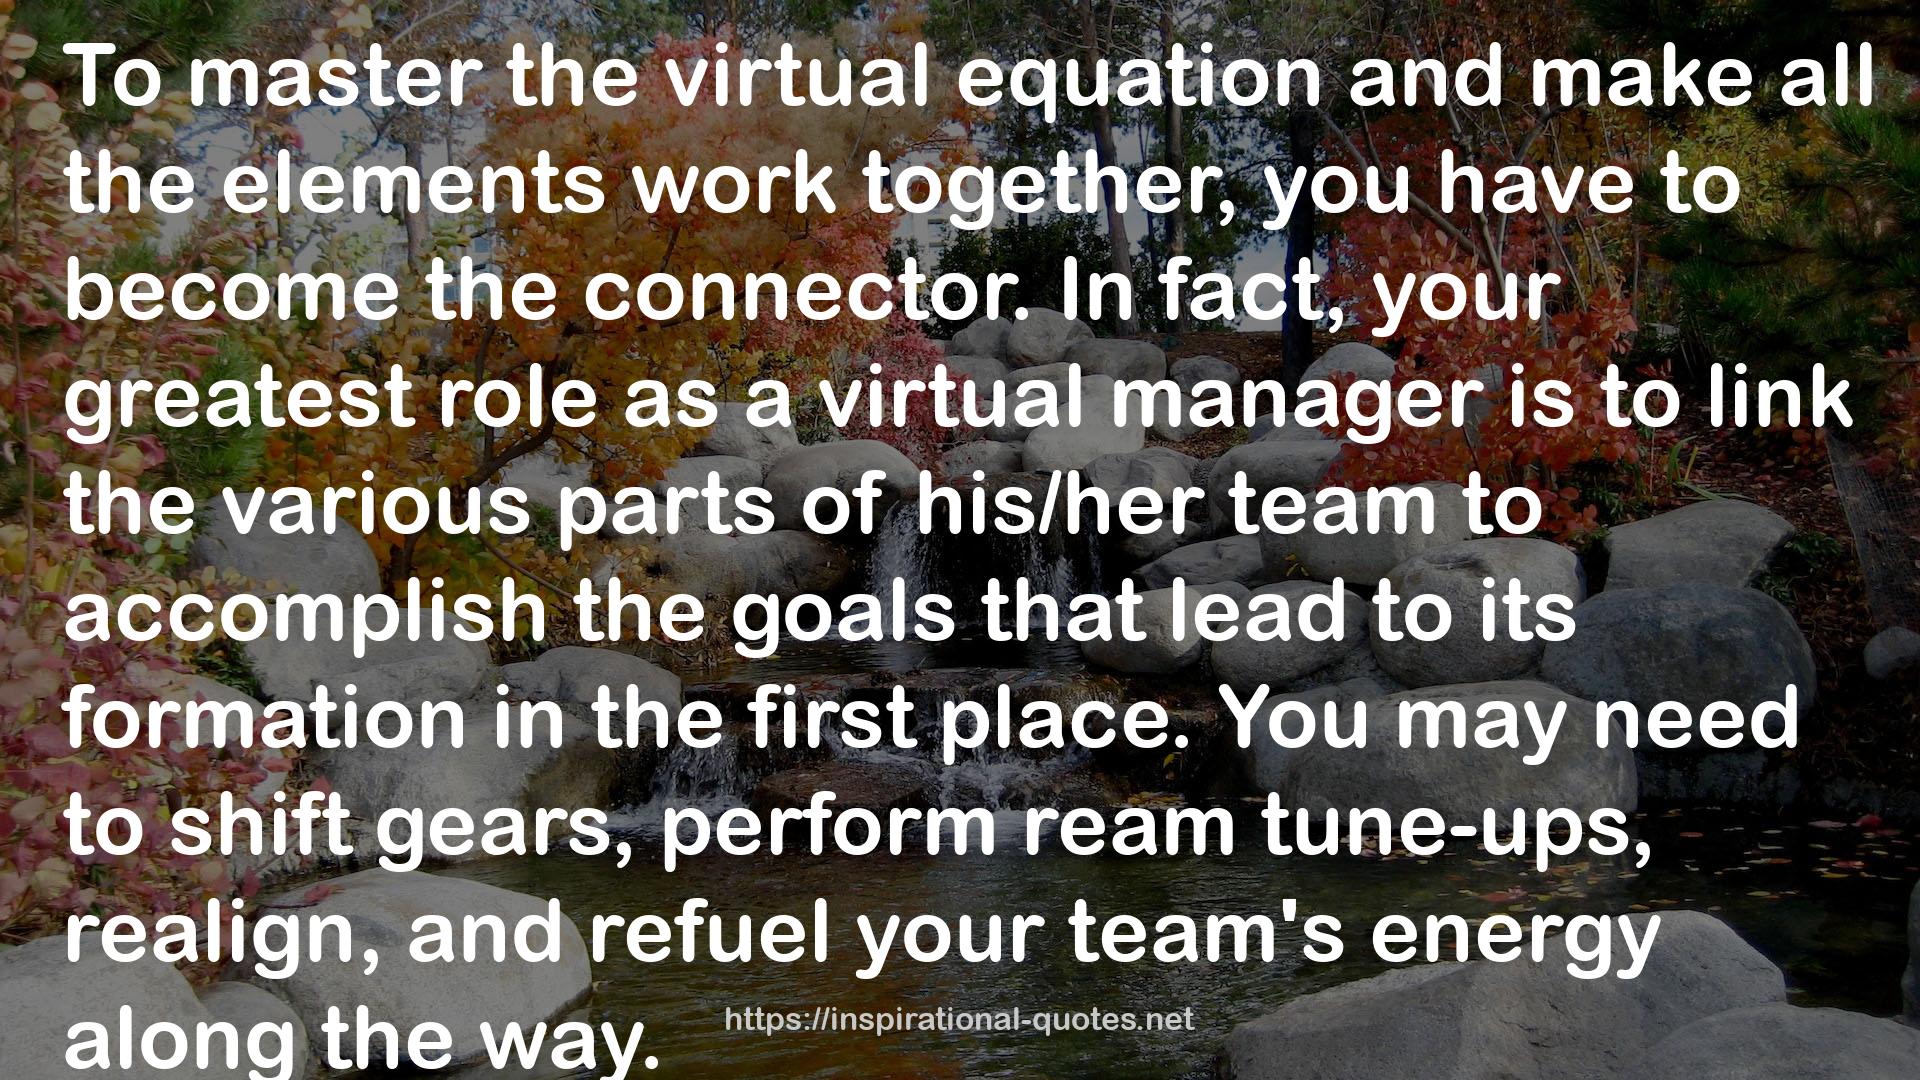 A Manager's Guide to Virtual Teams QUOTES